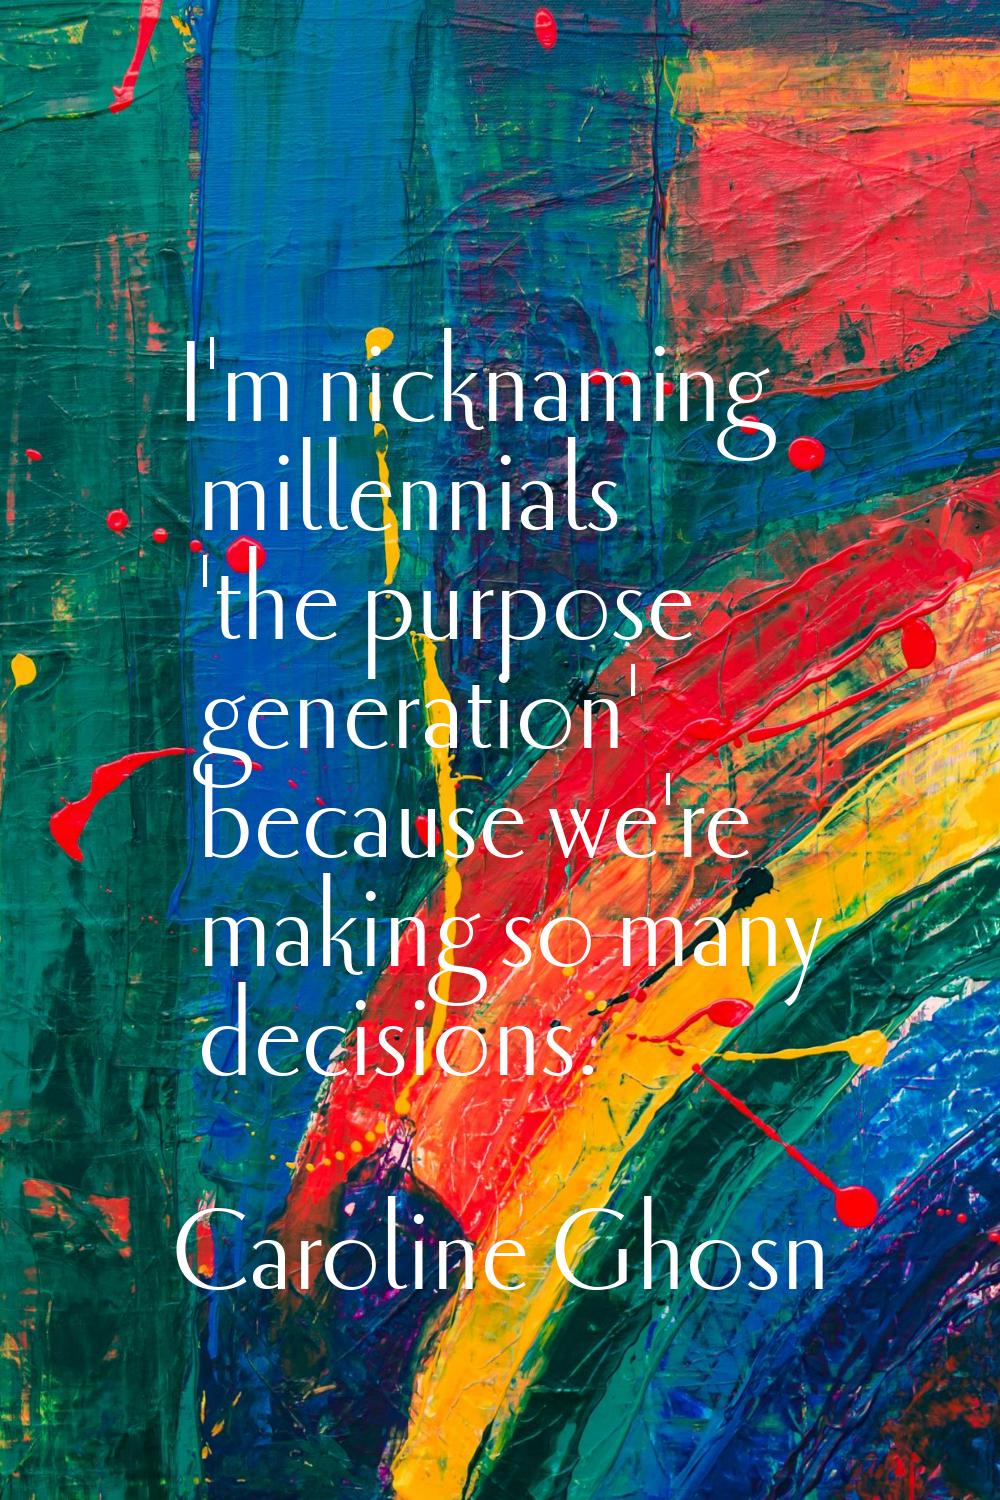 I'm nicknaming millennials 'the purpose generation' because we're making so many decisions.